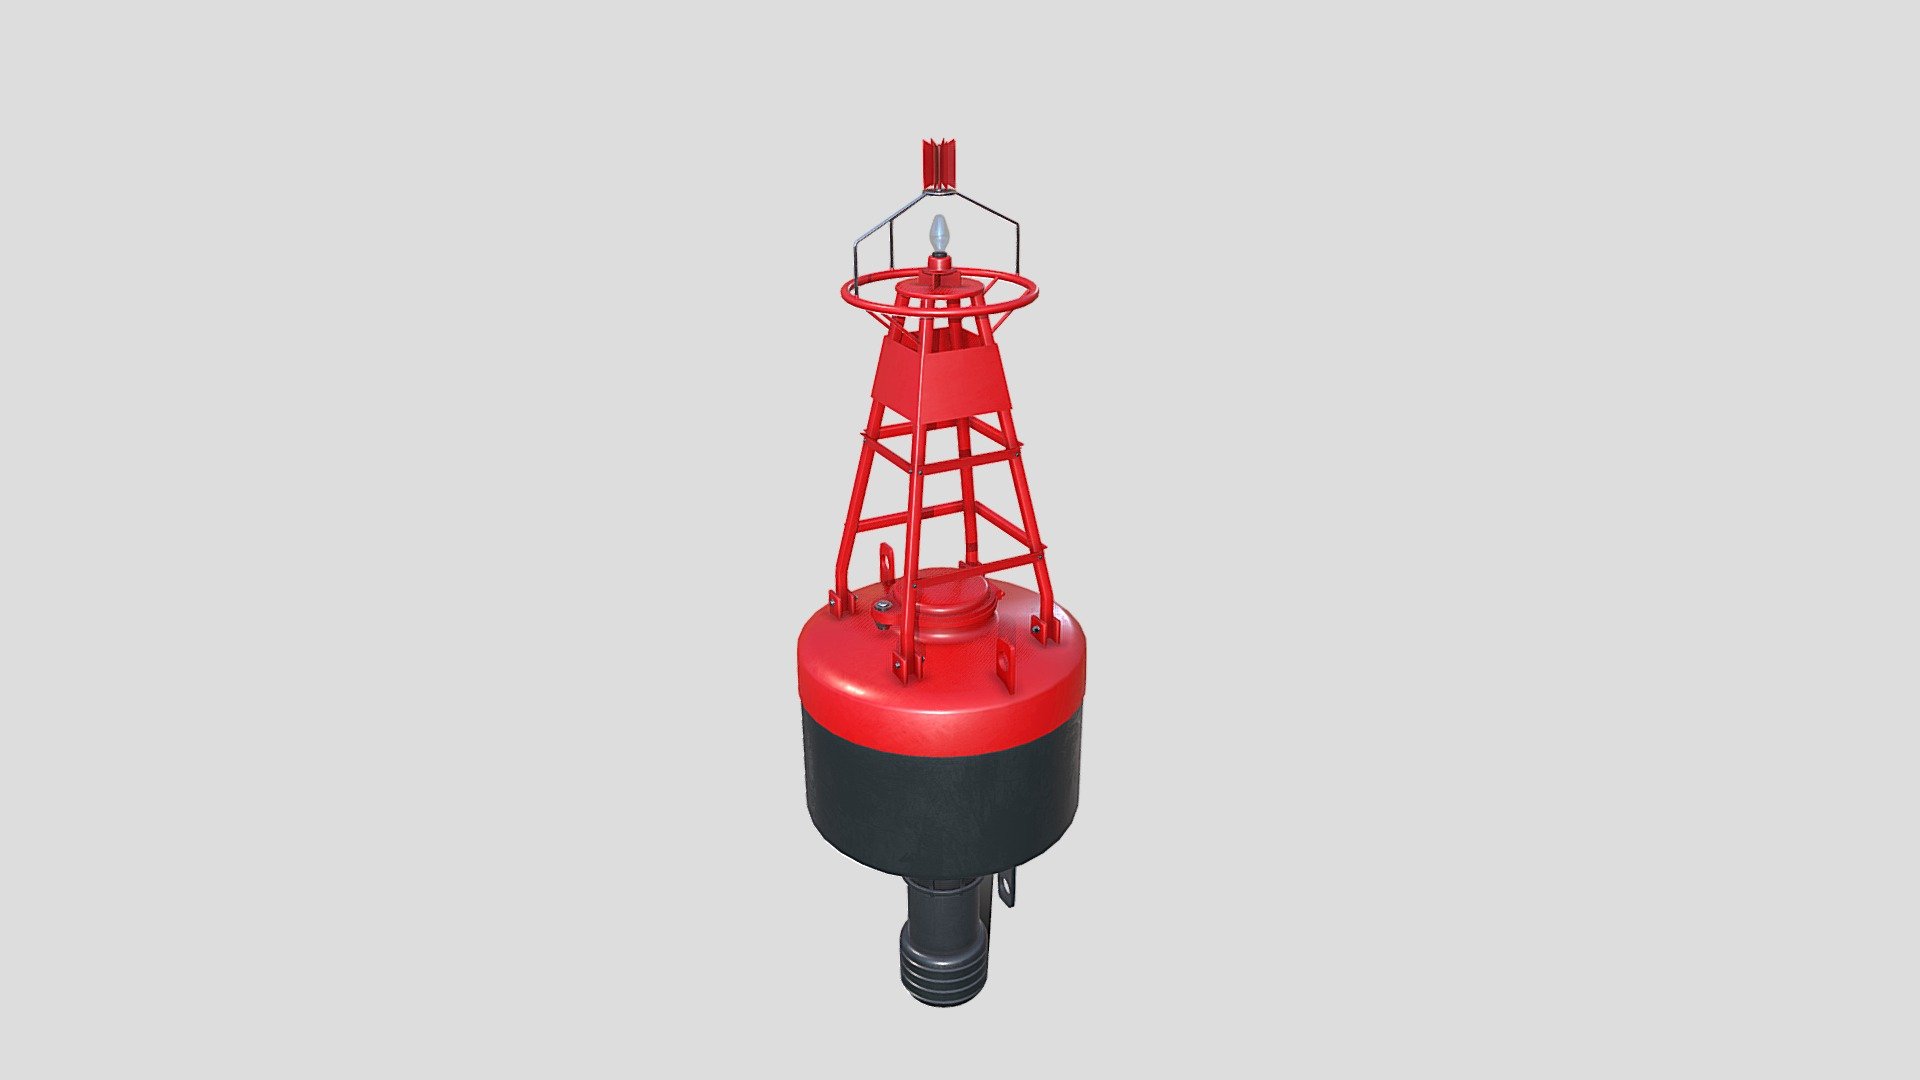 Water buoy 3d model rendered with Cycles in Blender, as per seen on attached images. 
The model is scaled to real-life scale (4.74 meters’ height).

File formats:
-.blend, rendered with cycles, as seen in the images;
-.obj, with materials applied;
-.dae, with materials applied;
-.fbx, with materials applied;
-.stl;

Files come named appropriately and split by file format.

3D Software:
The 3D model was originally created in Blender 3.1 and rendered with Cycles.

Materials and textures:
The models have materials applied in all formats, and are ready to import and render.
Materials are image based using PBR, the model comes with five 4k png image textures.

For any problems please feel free to contact me.

Don't forget to rate and enjoy! - Water buoy v1 - Buy Royalty Free 3D model by dragosburian 3d model